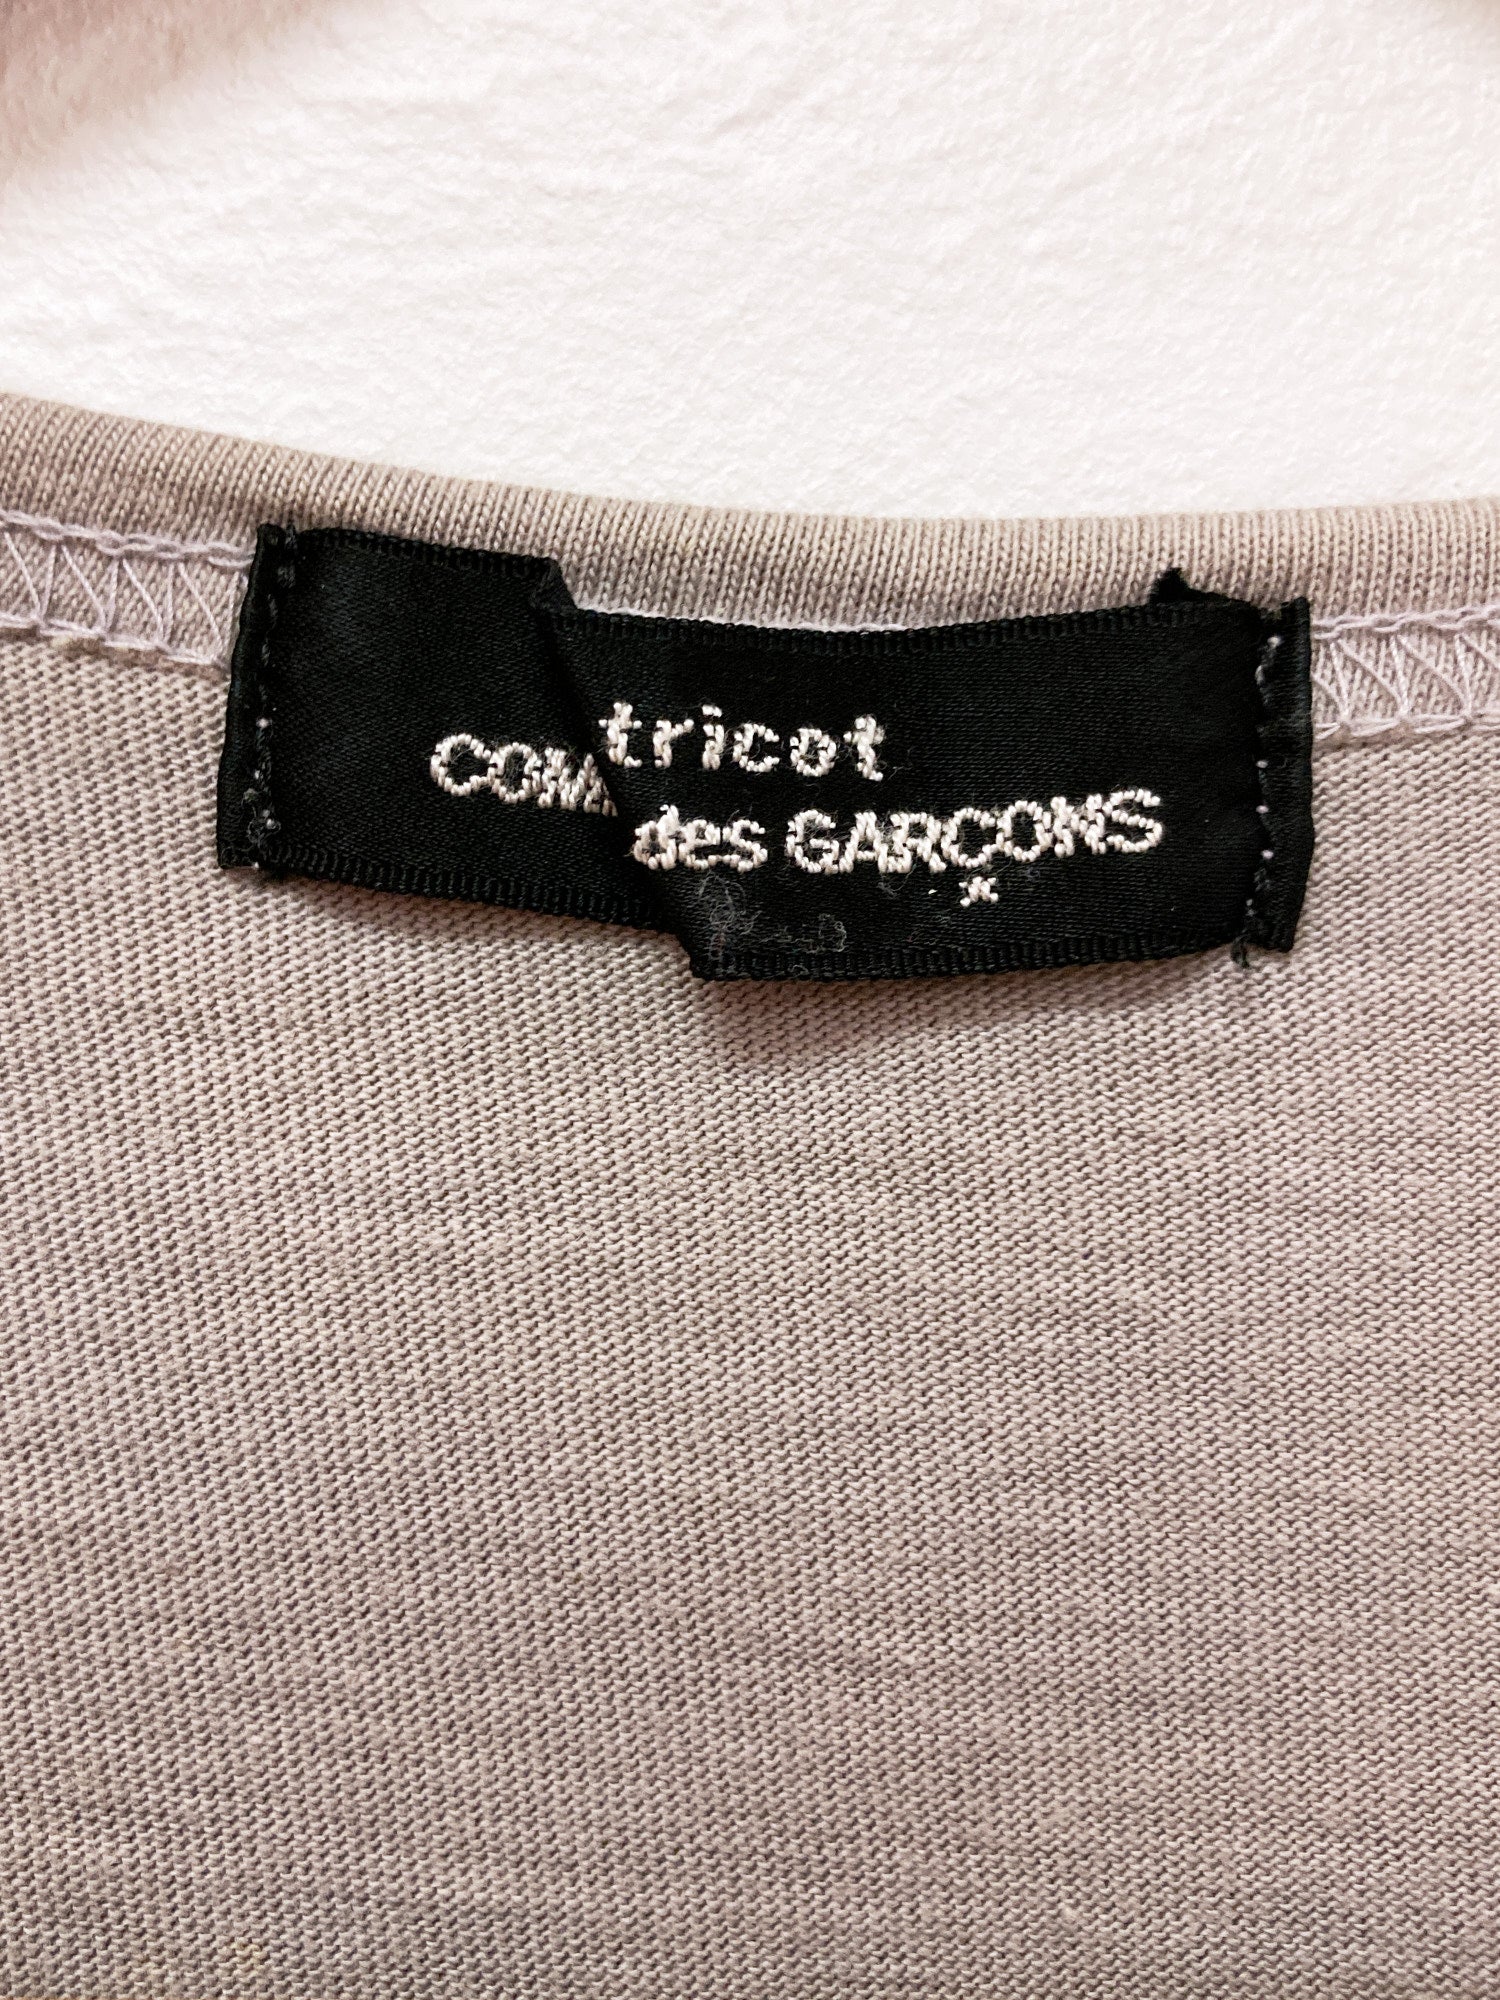 Tricot Comme des Garcons 2000 grey cotton jersey rug panel sleeveless top